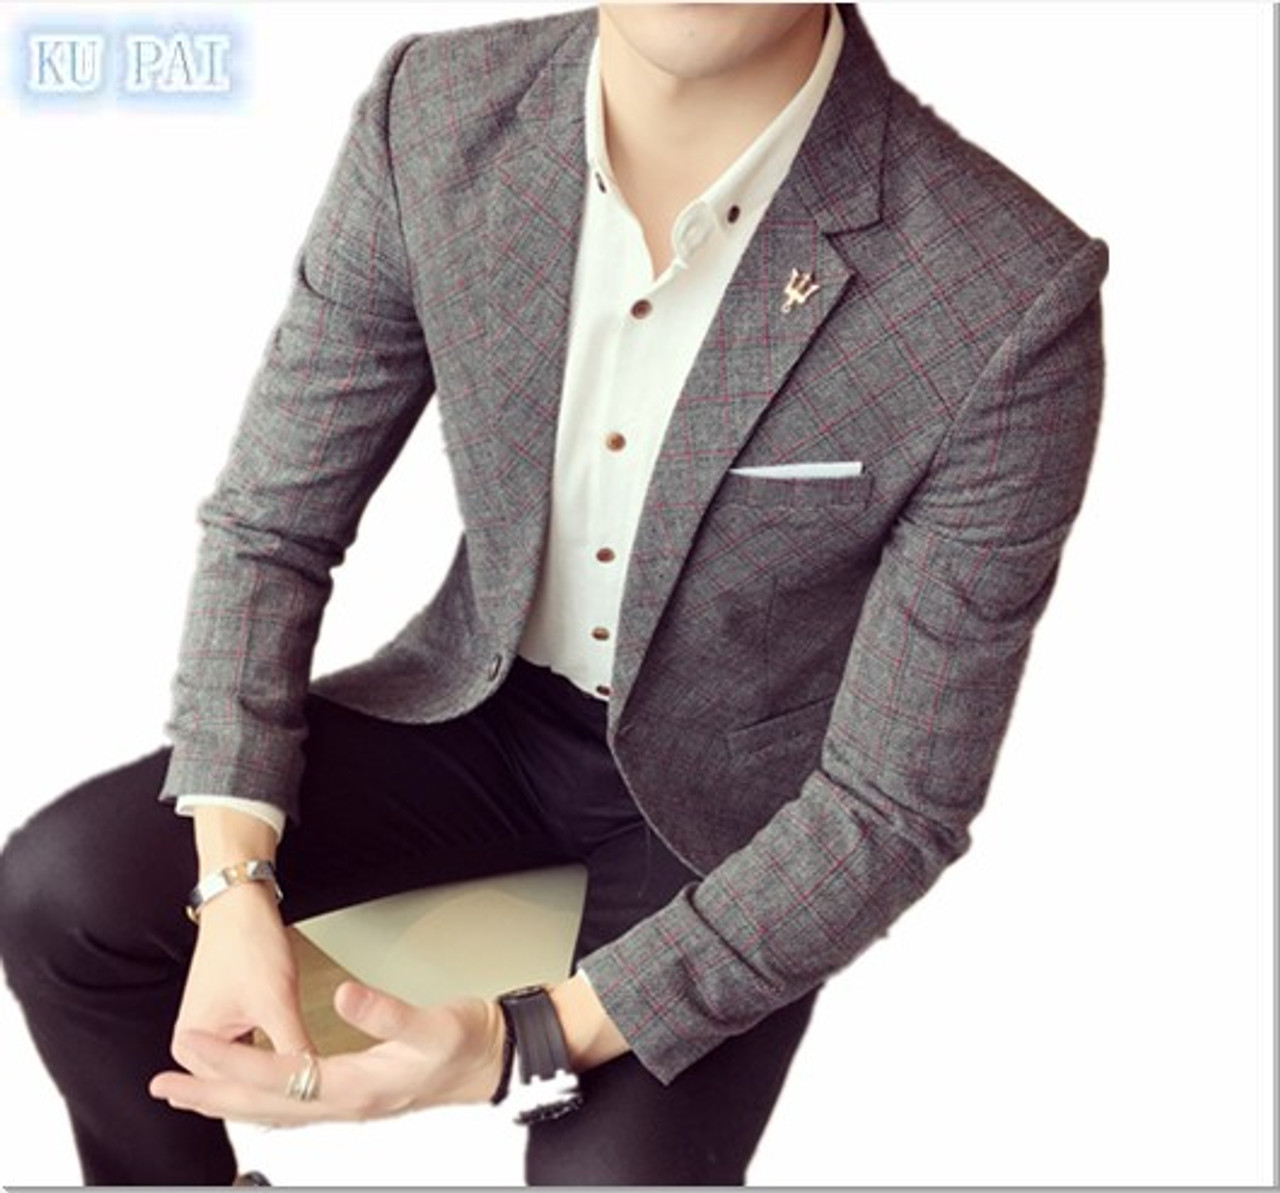 2017 spring men's high-end casual suits 